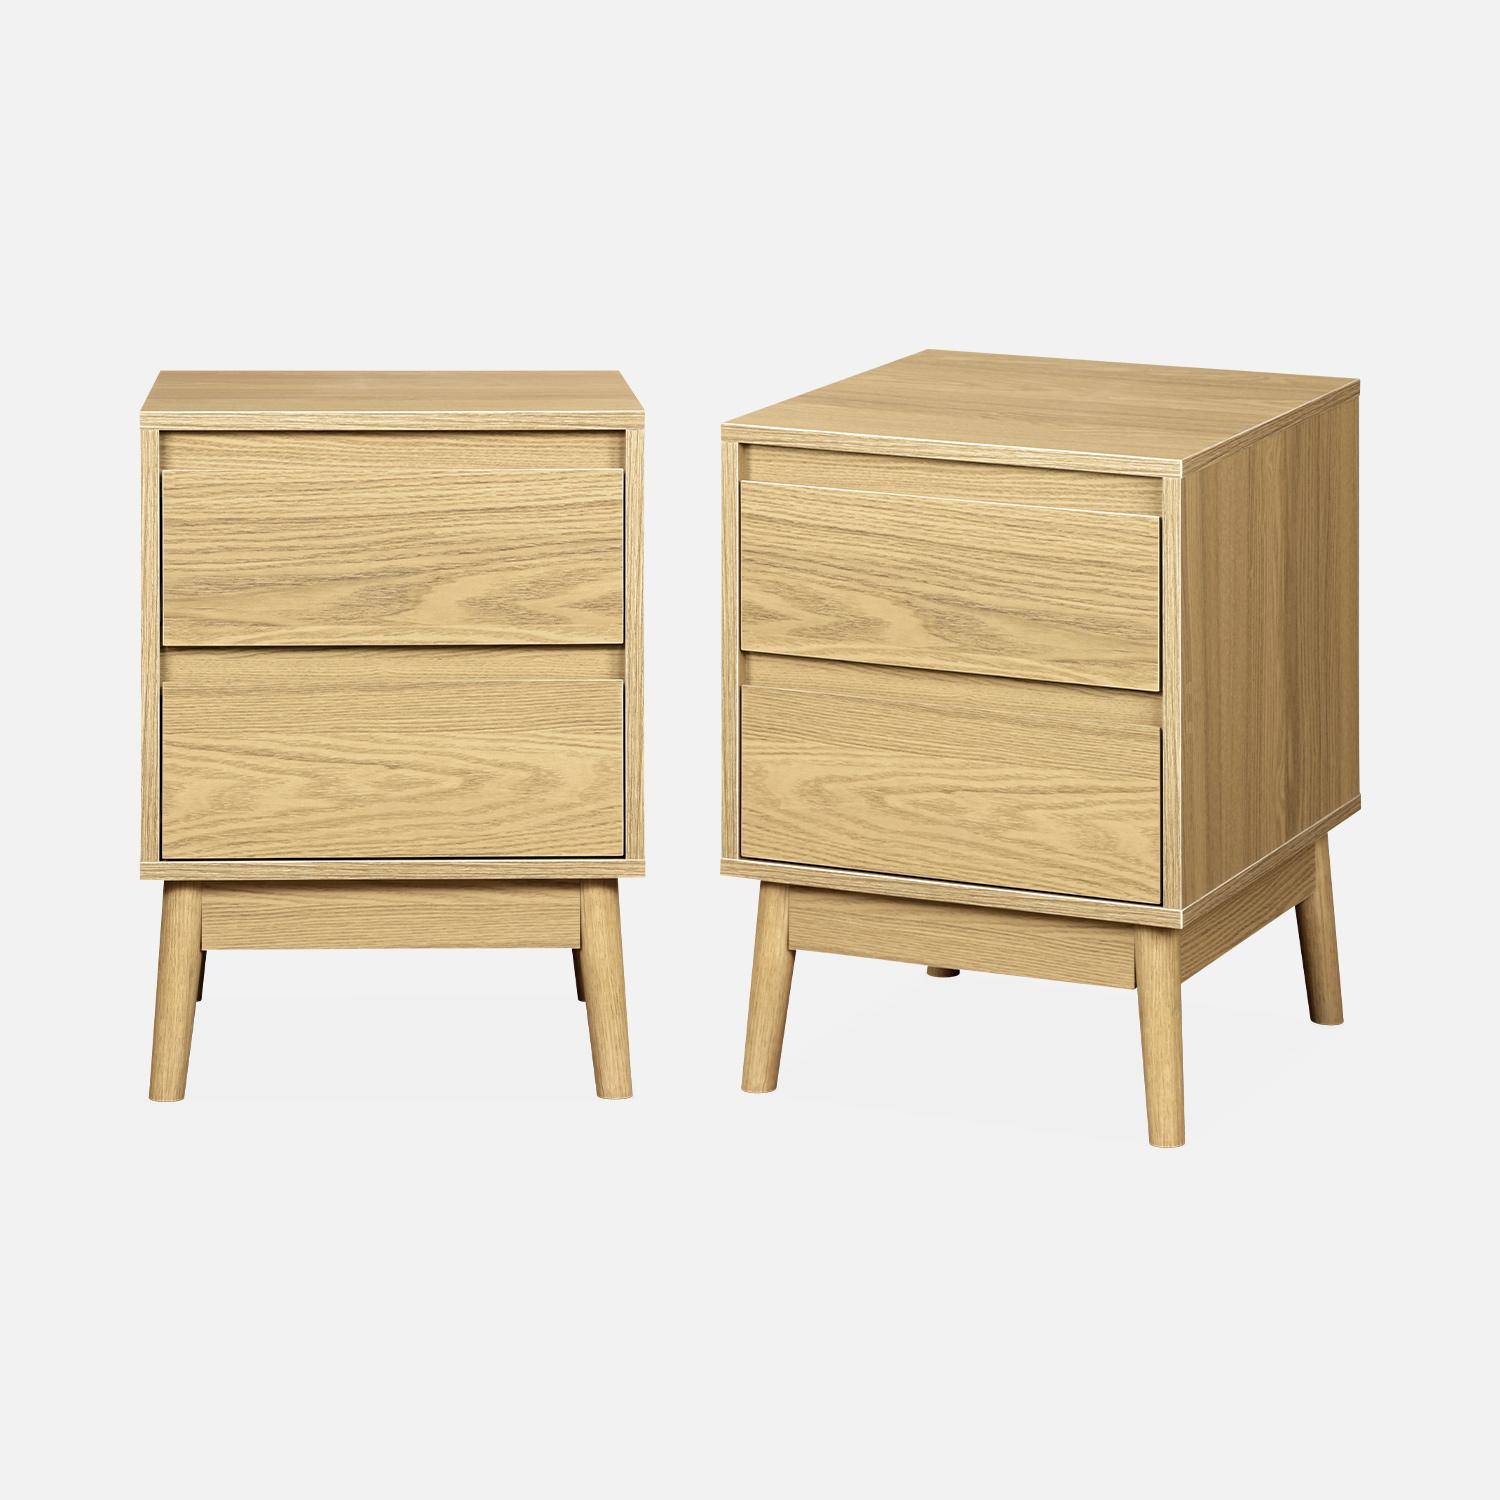 Pair of bedside tables with 2 drawers, 26x40x56cm - Dune - Natural Photo3